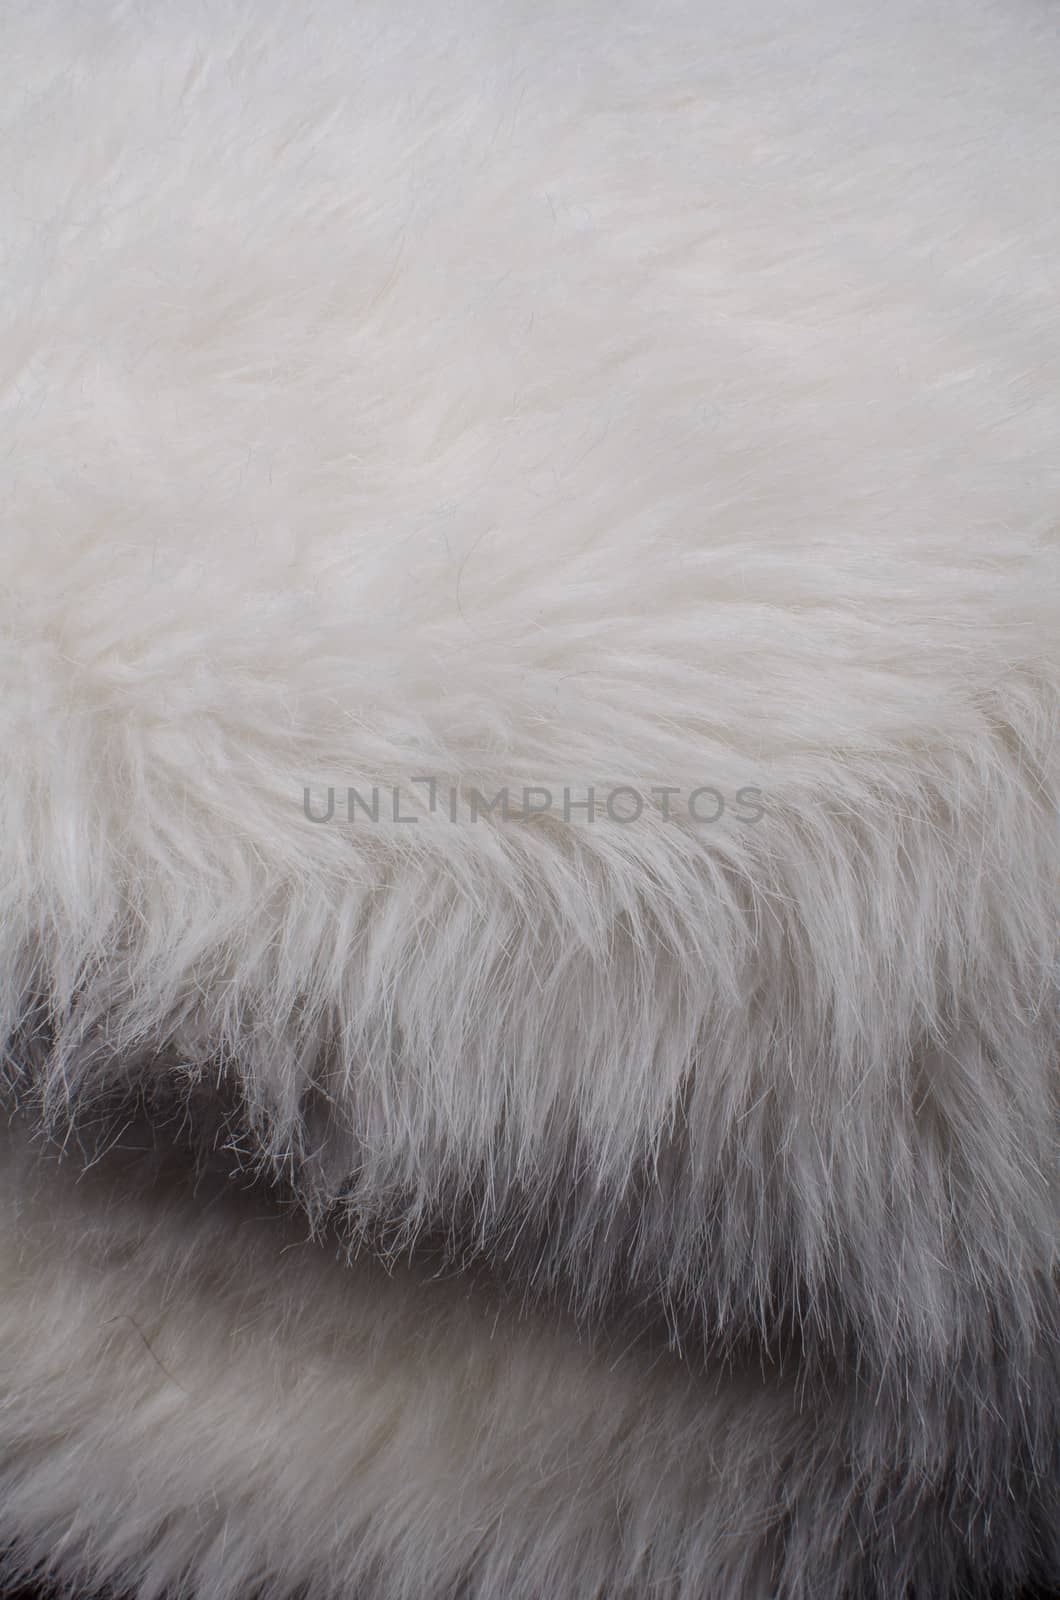 Full frame take of some cozy white furry fabric